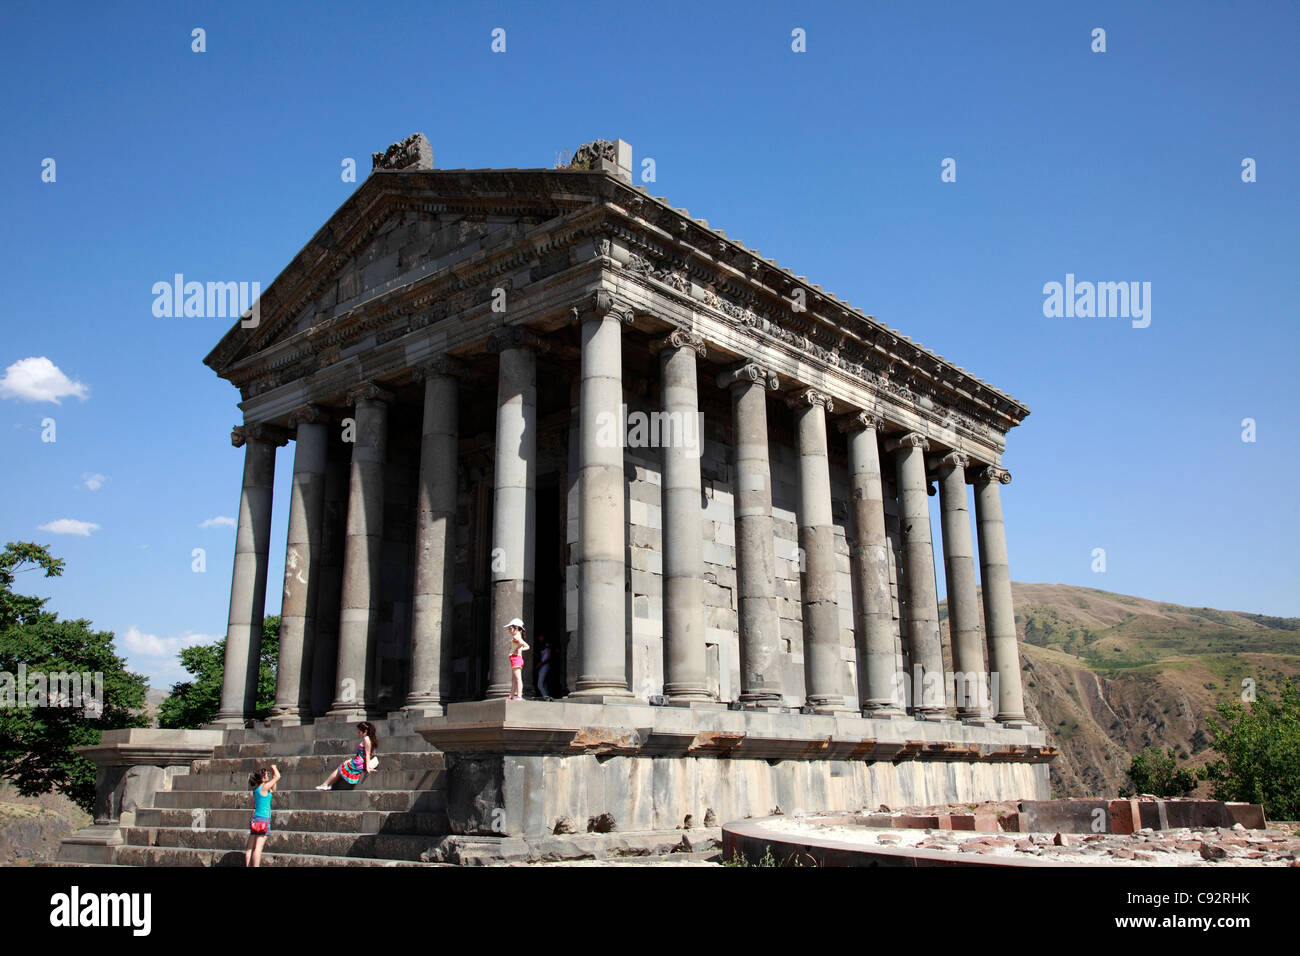 The temple at Garni is one of the most famous archaeological sites in Armenia. Stock Photo